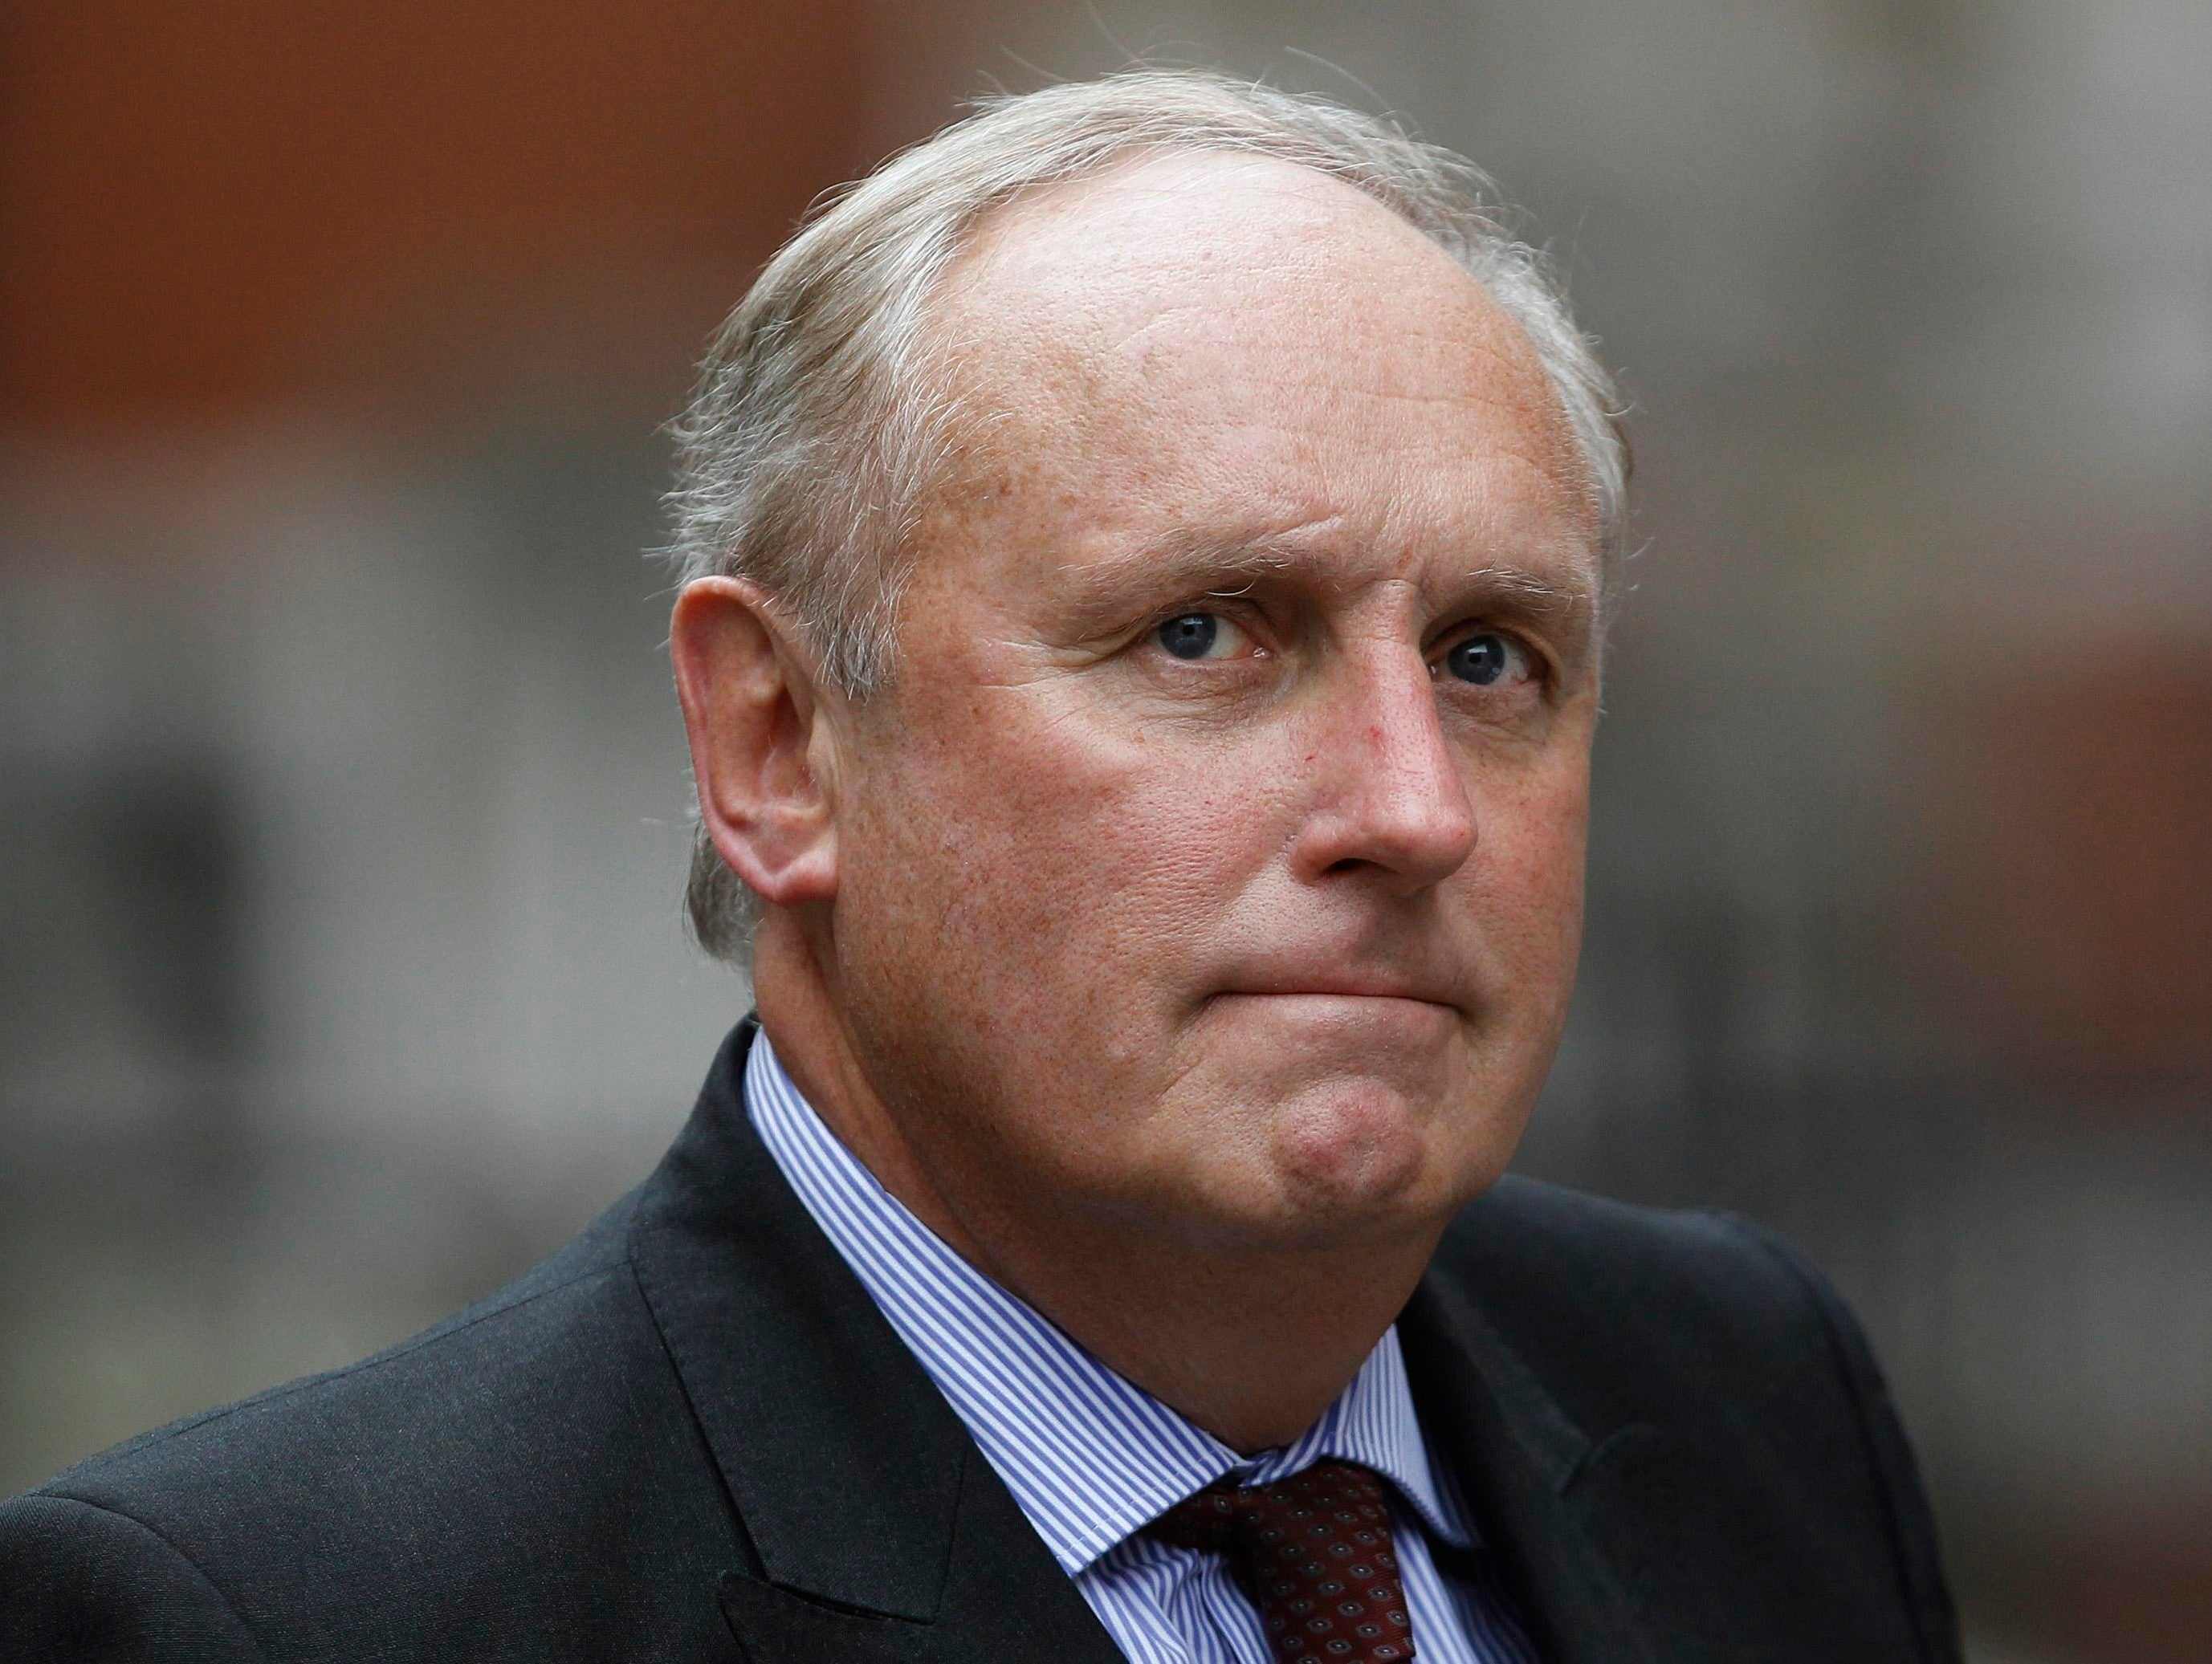 Paul Dacre warns reversing Daily Mail's support for Brexit after his departure would be 'editorial and commercial suicide'